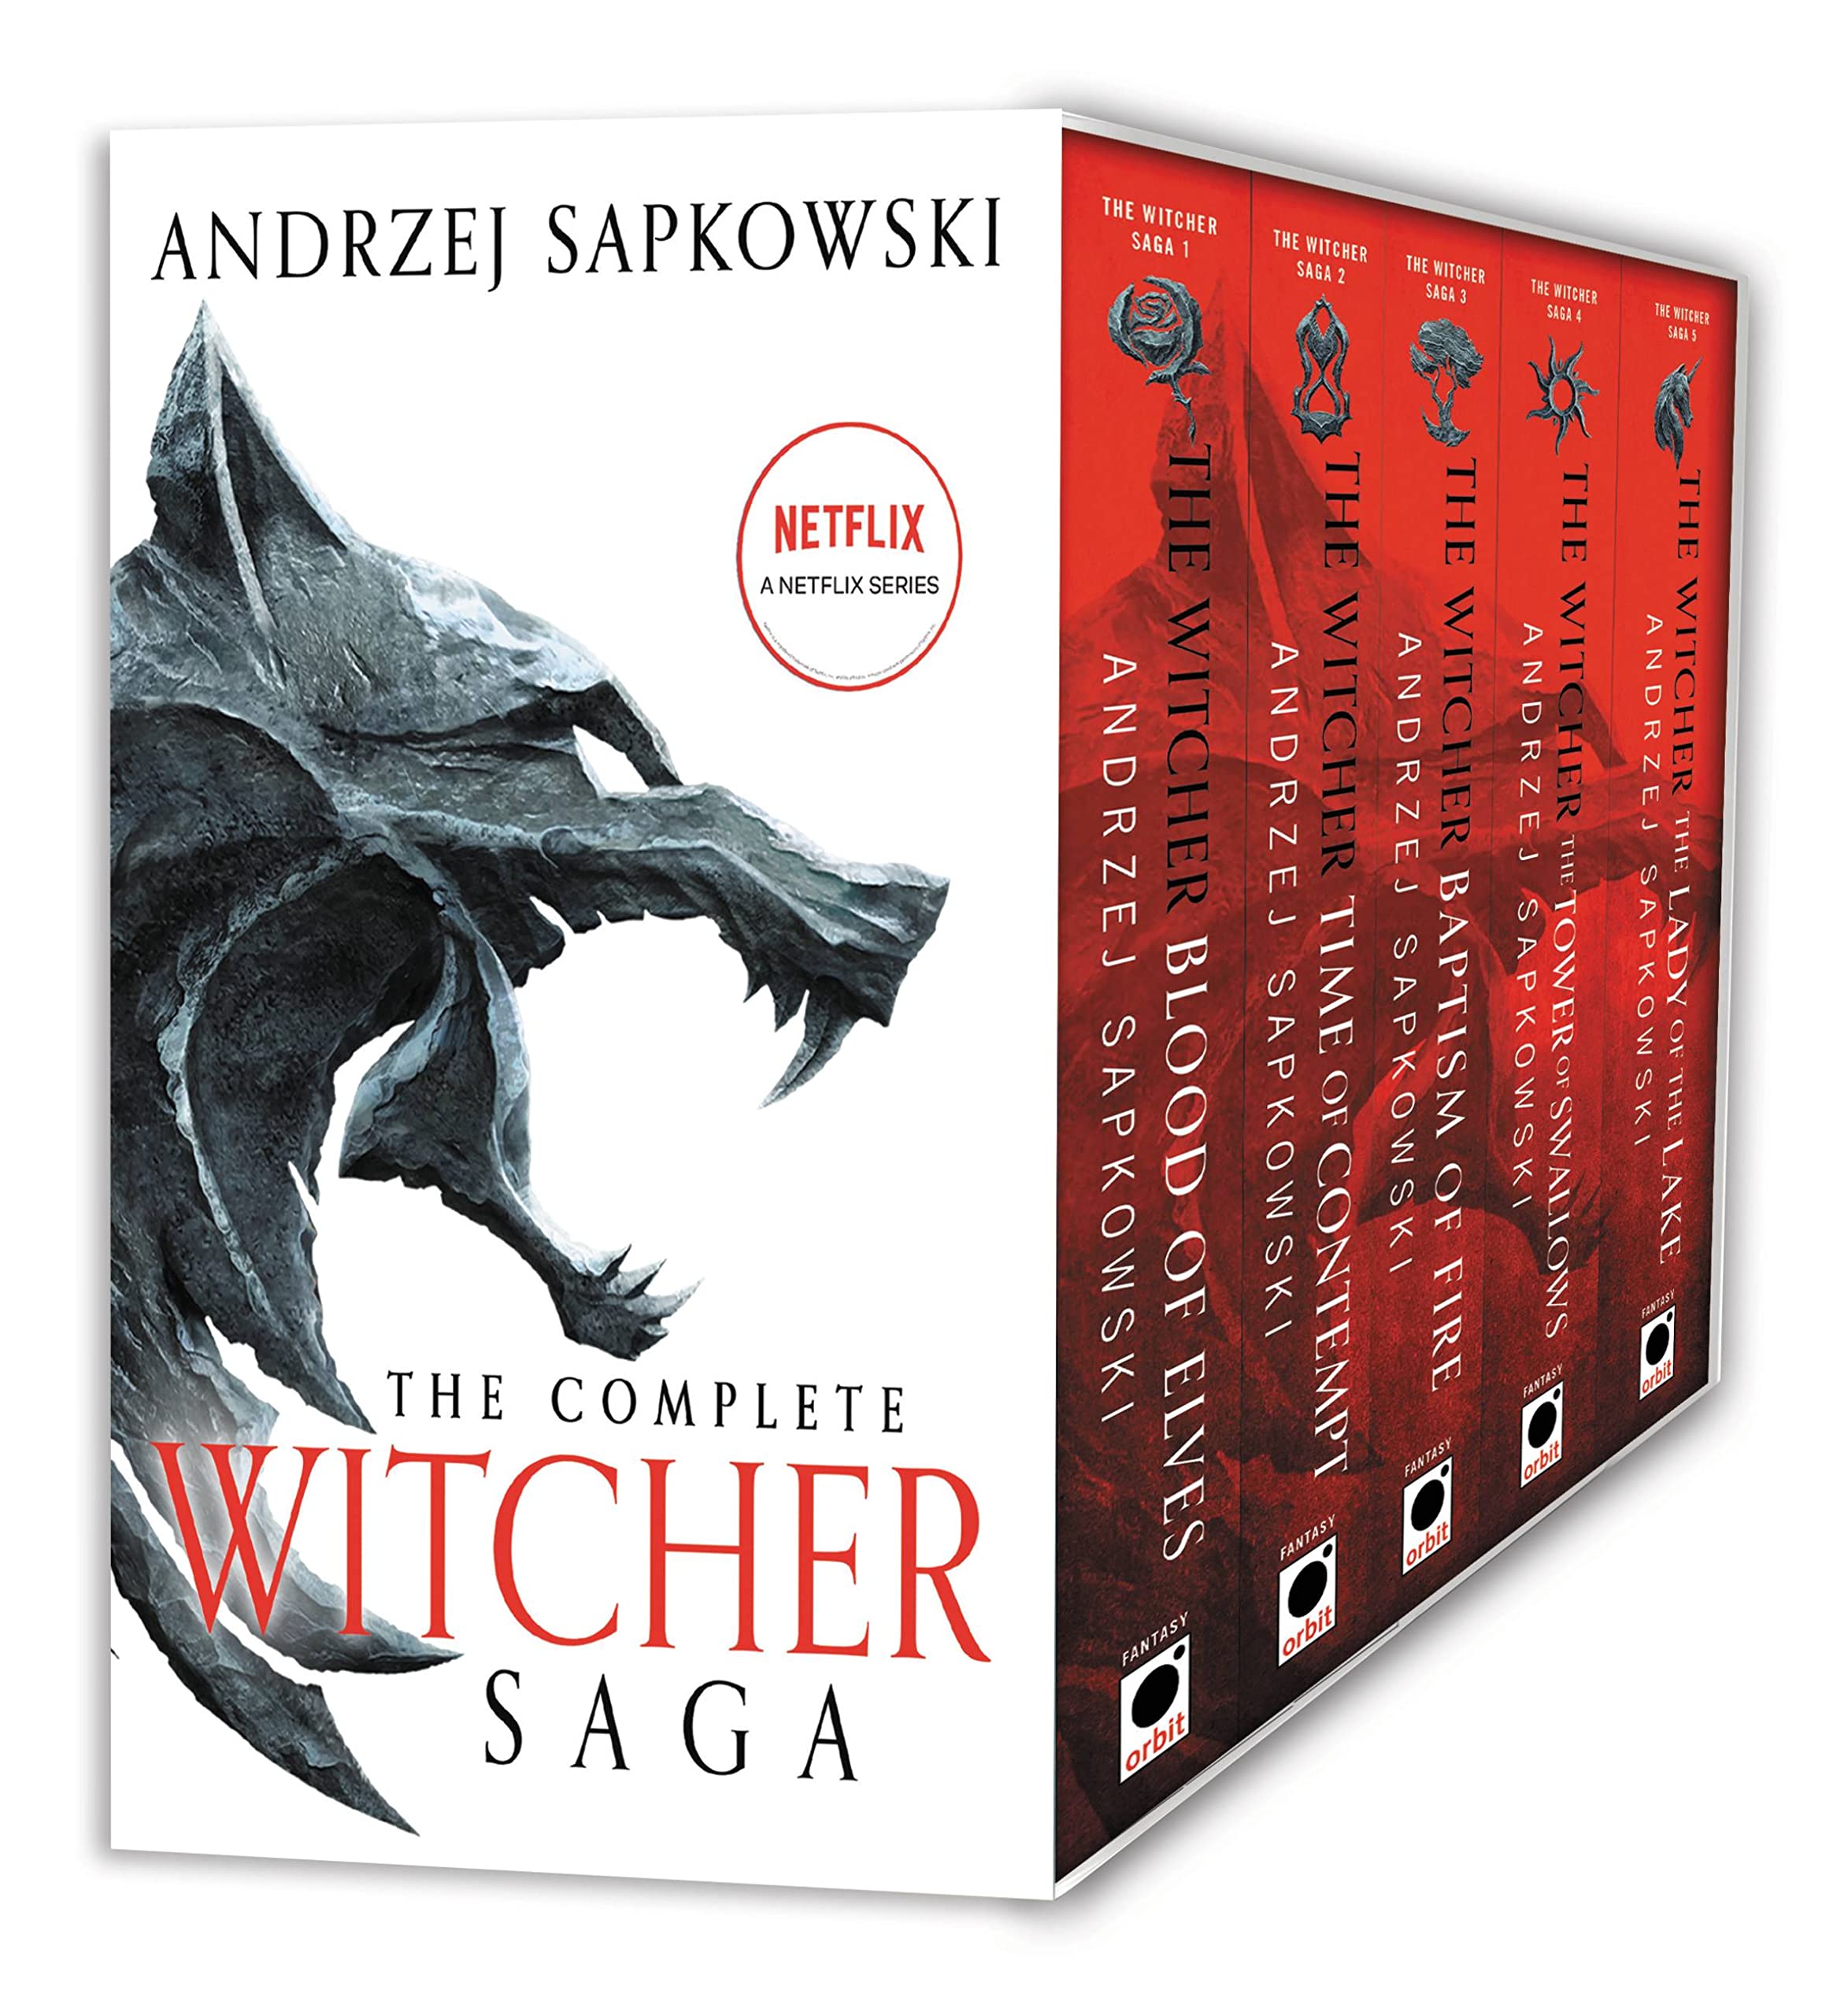 The Witcher Boxed Set Blood of Elves, the Time of Contempt, Baptism of Fire, the Tower of Swallows, the Lady of the Lake (Witcher) - SureShot Books